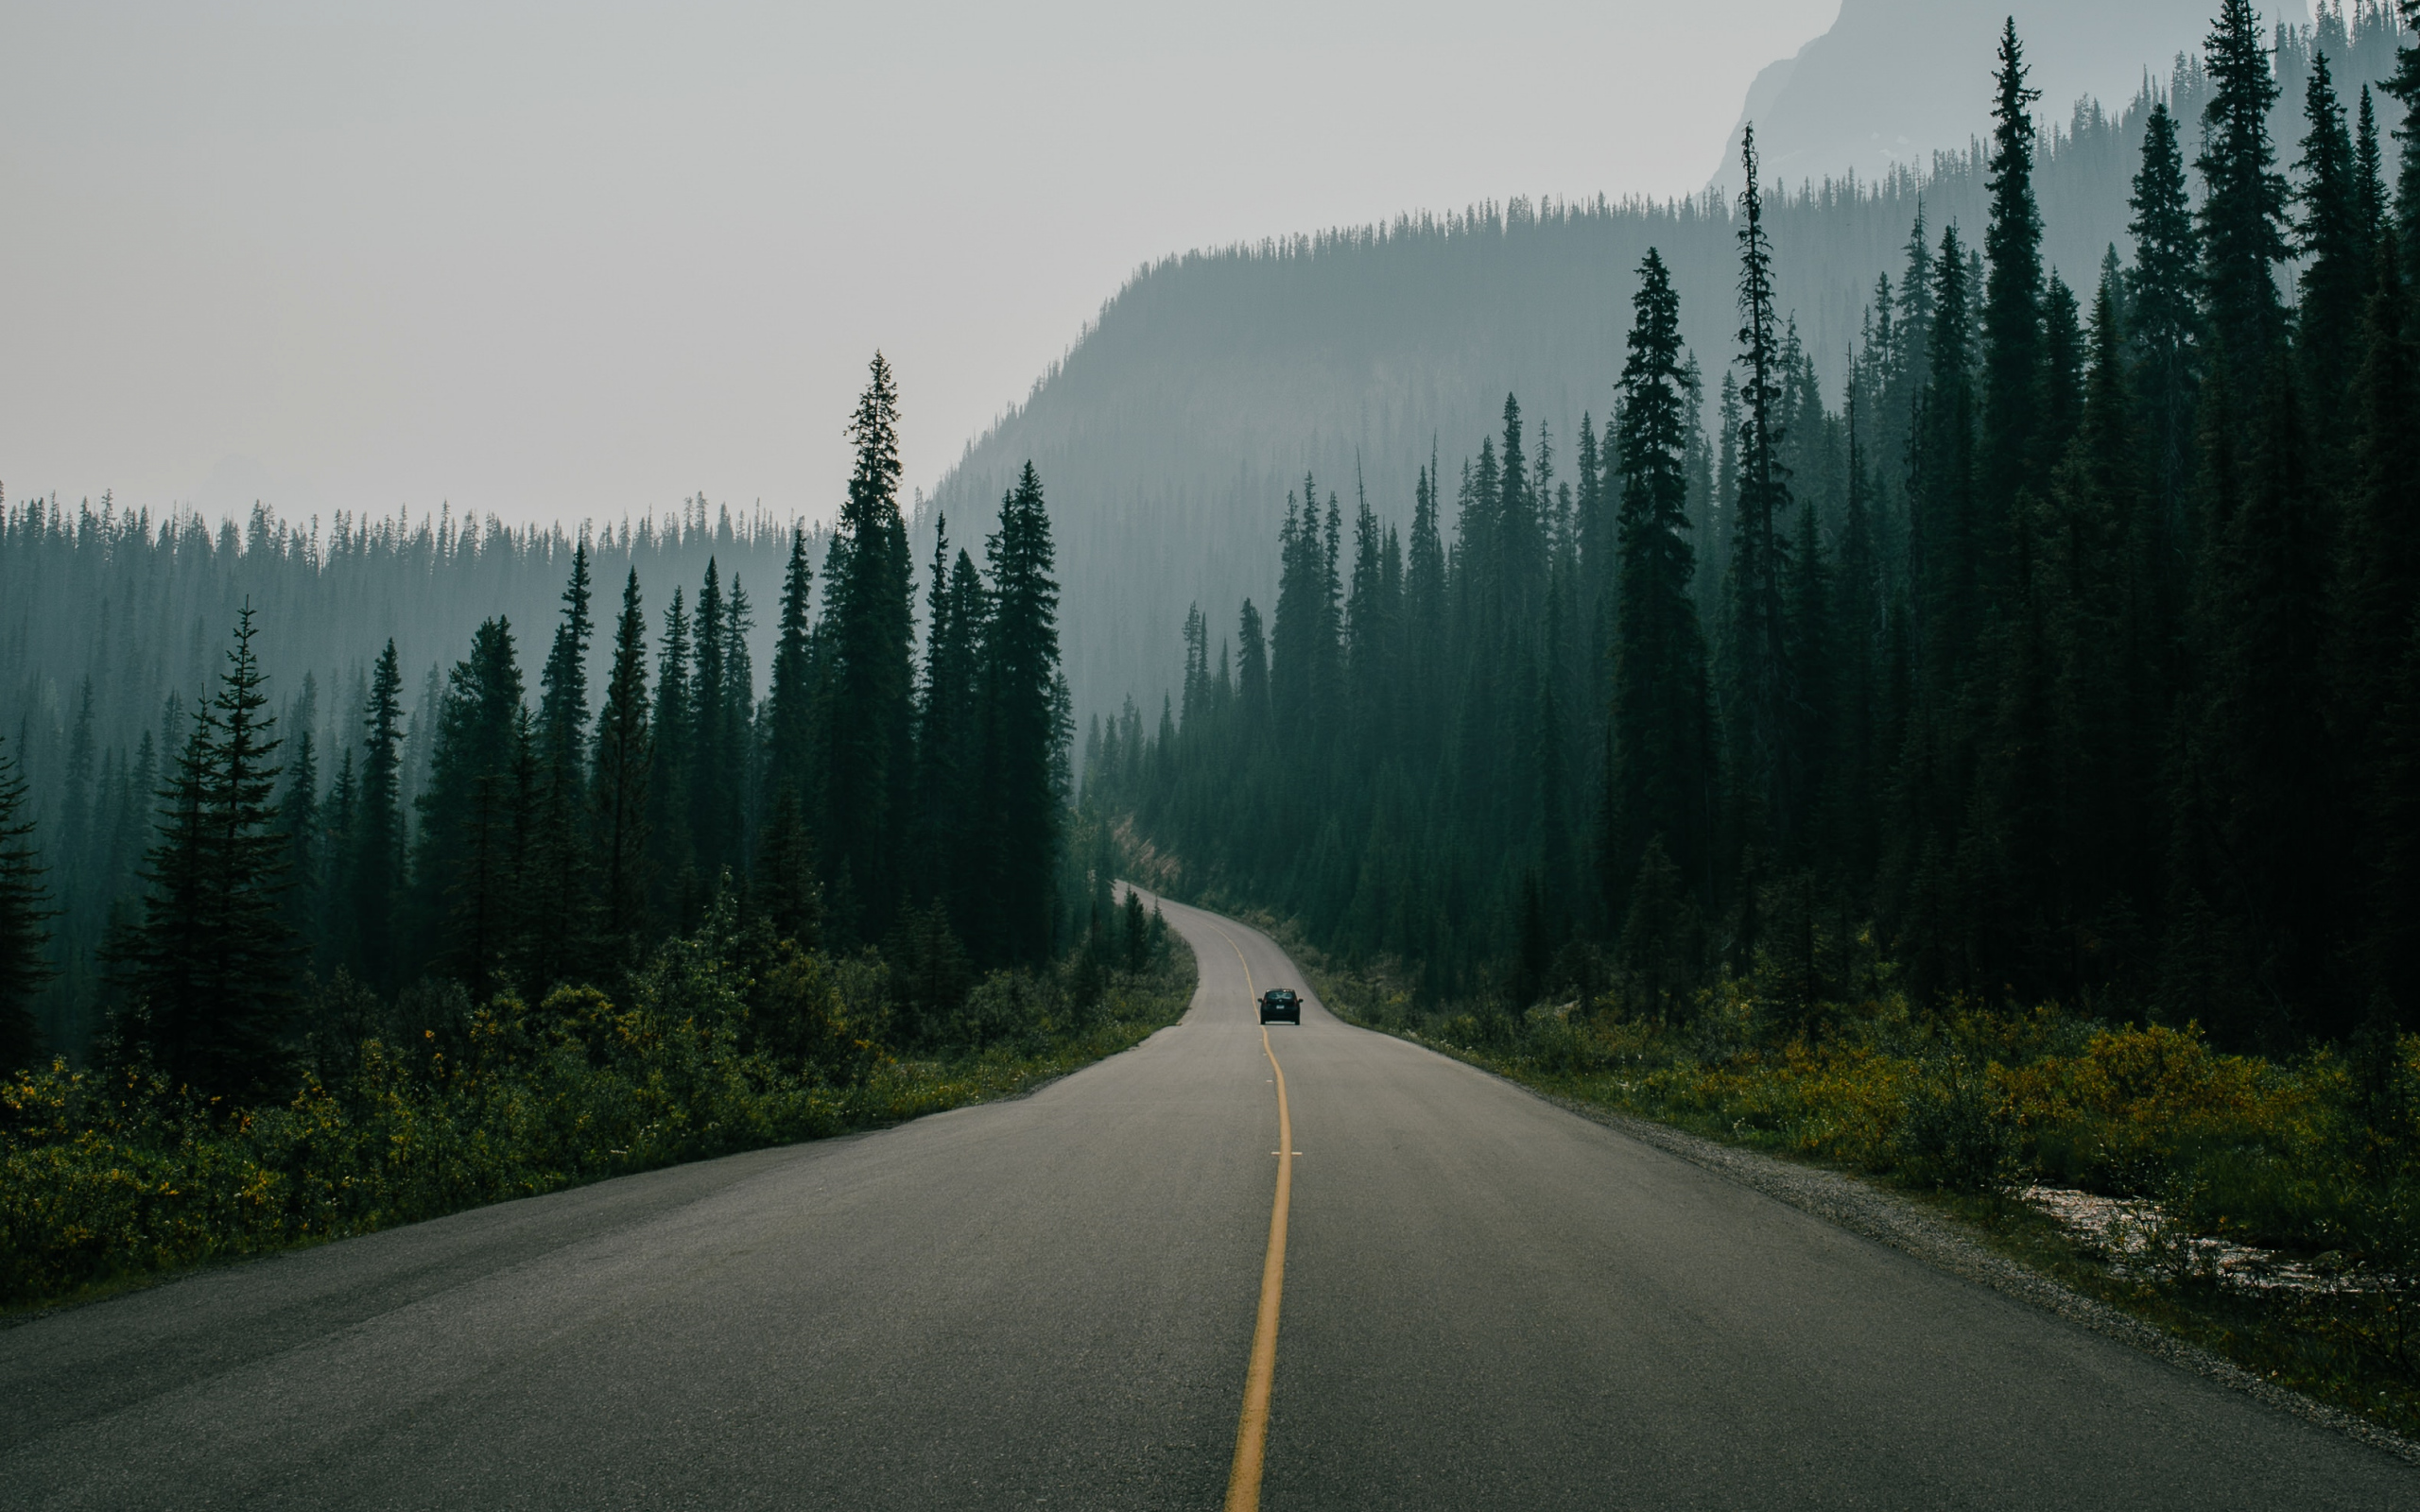 General 2560x1600 nature landscape road trees car pine trees forest morning mist plants